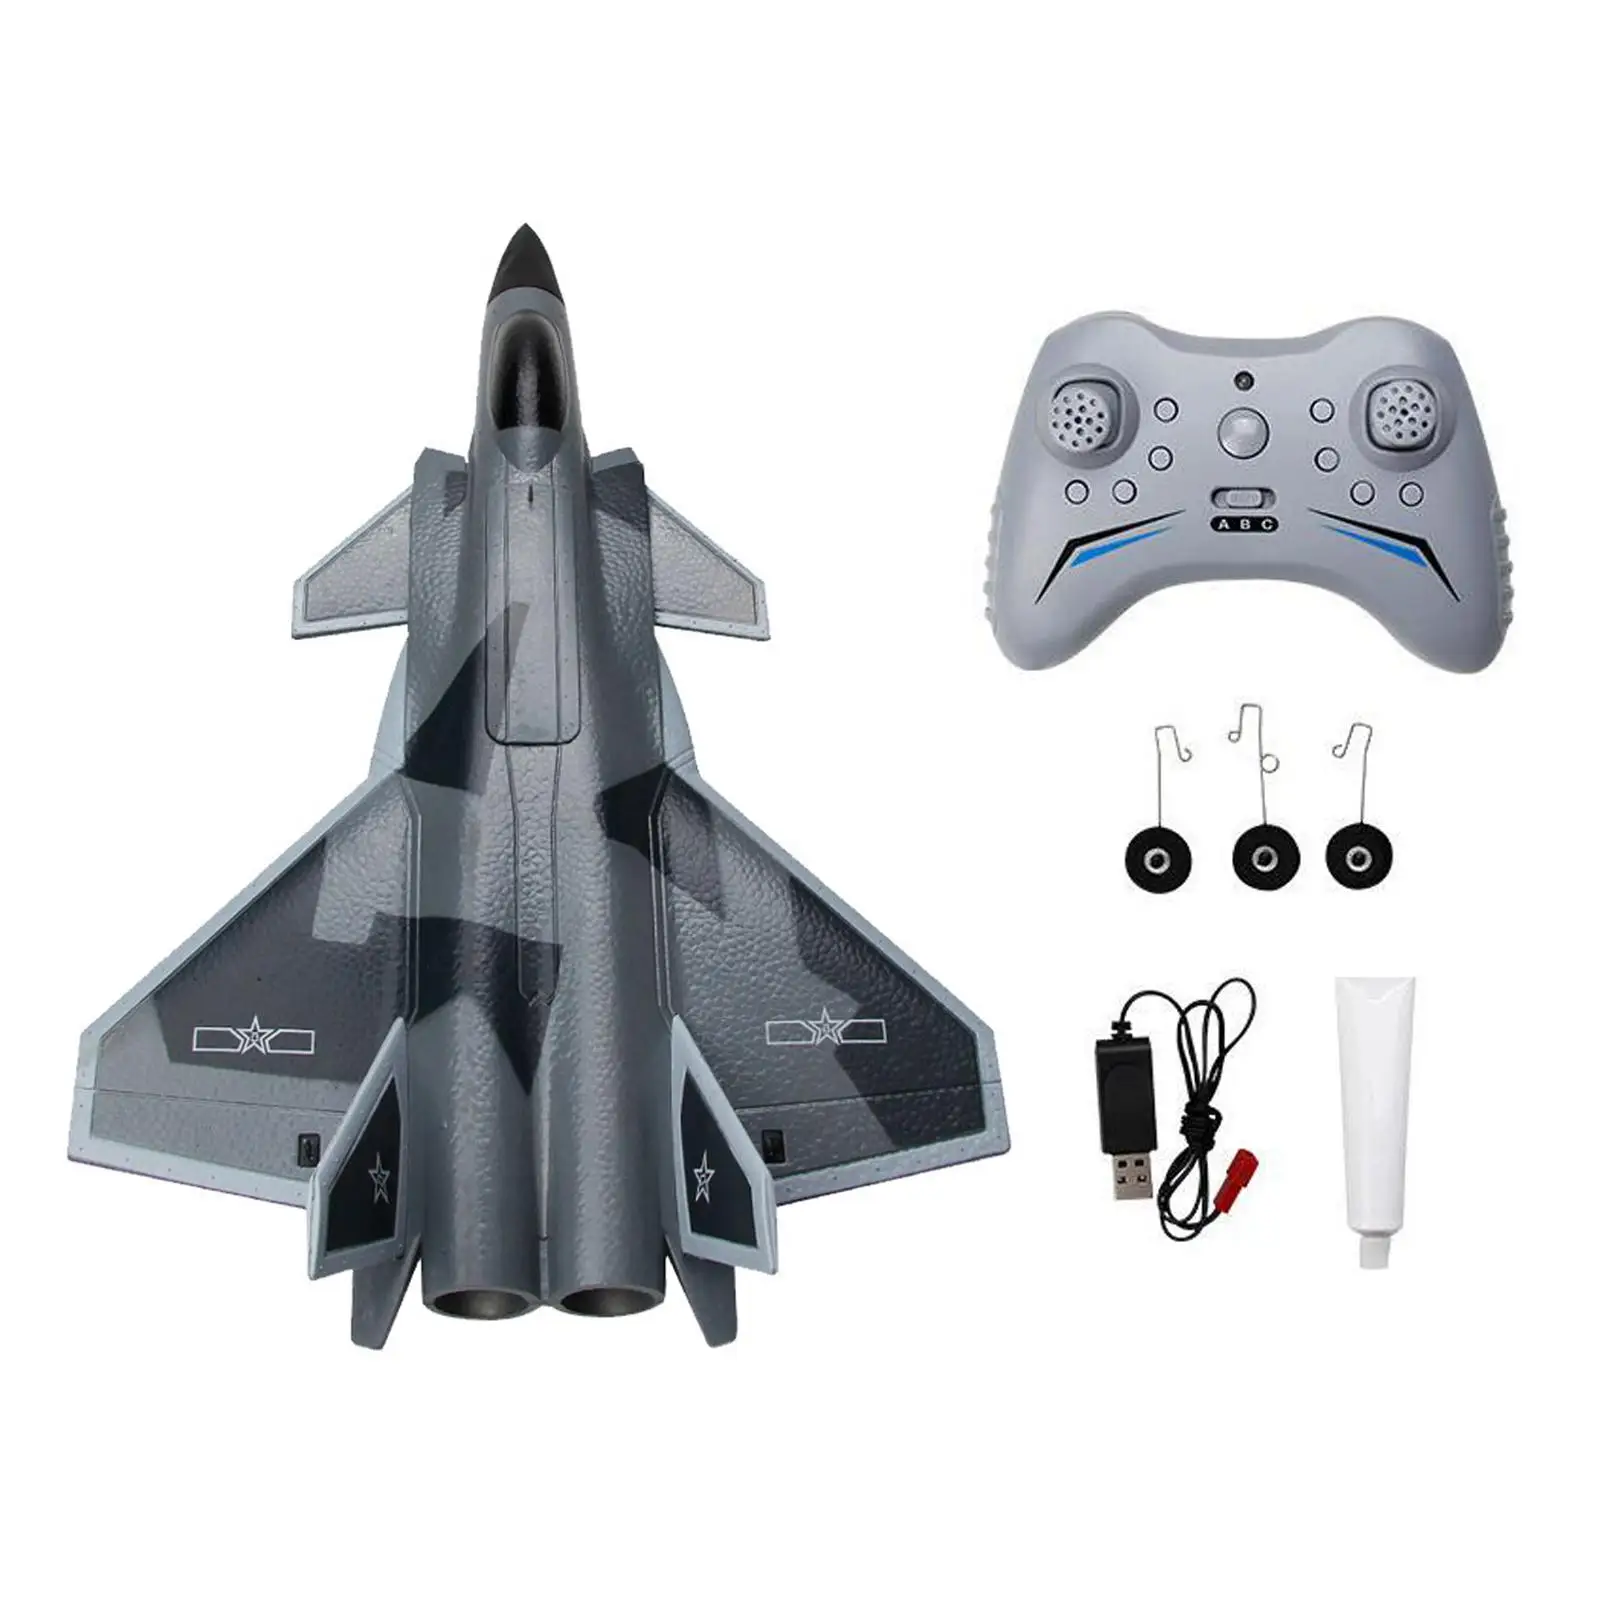 J20 Fighter Stable Outdoor Flighting Toys Practical Easy to Fly Multipurpose FX9630 RC Plane Holiday Gifts for Girls Boys Kids